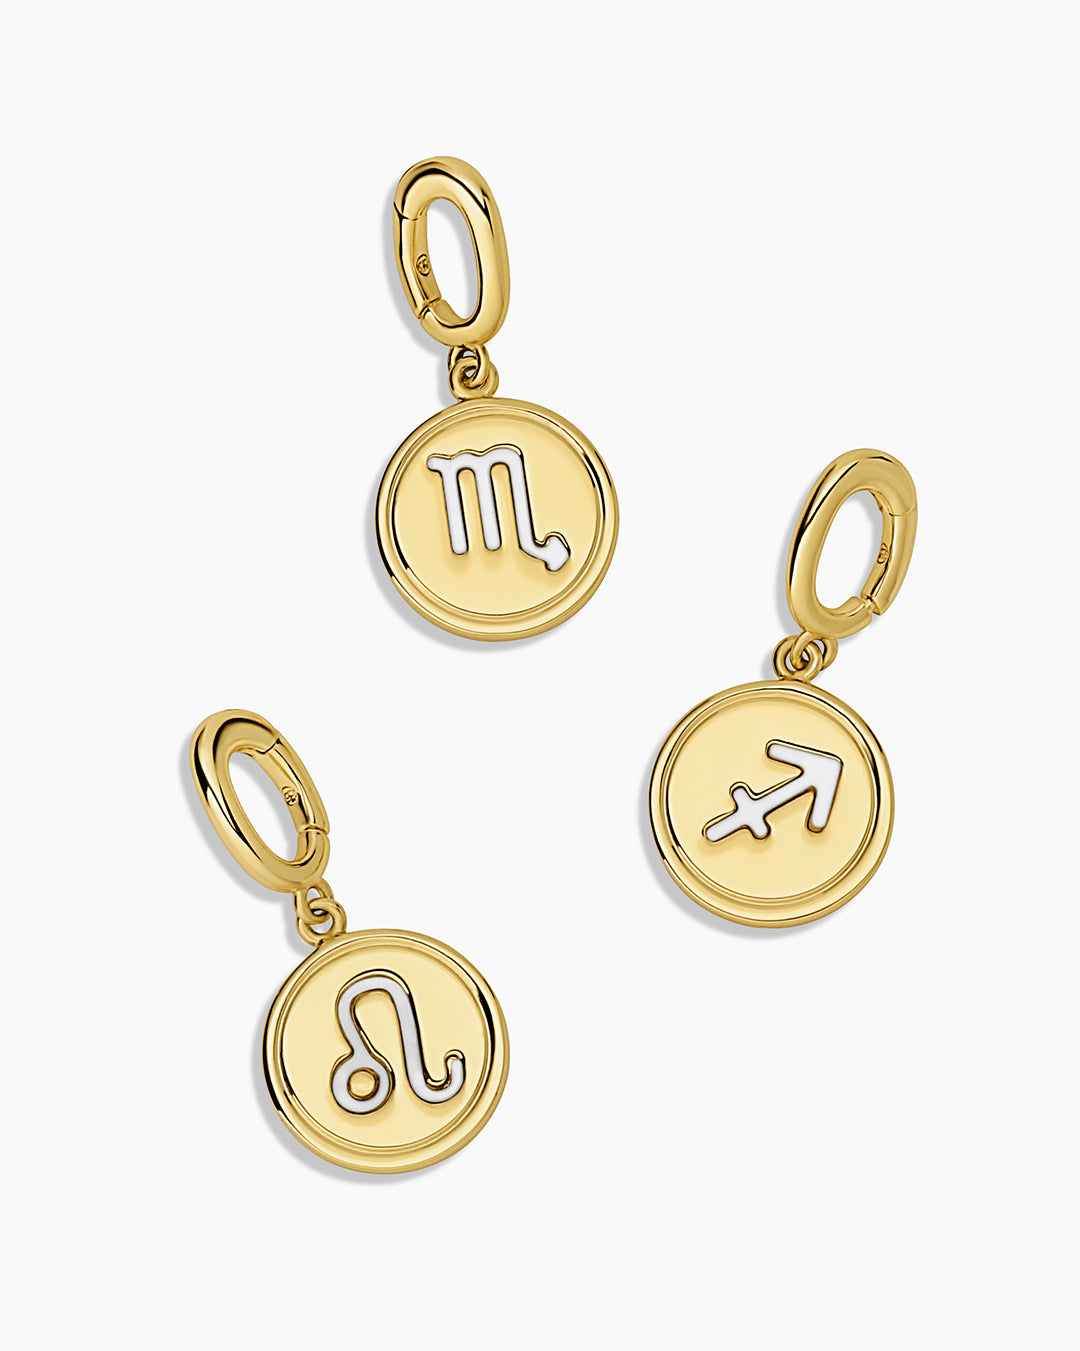 Gold Charms for Bracelets & Necklaces